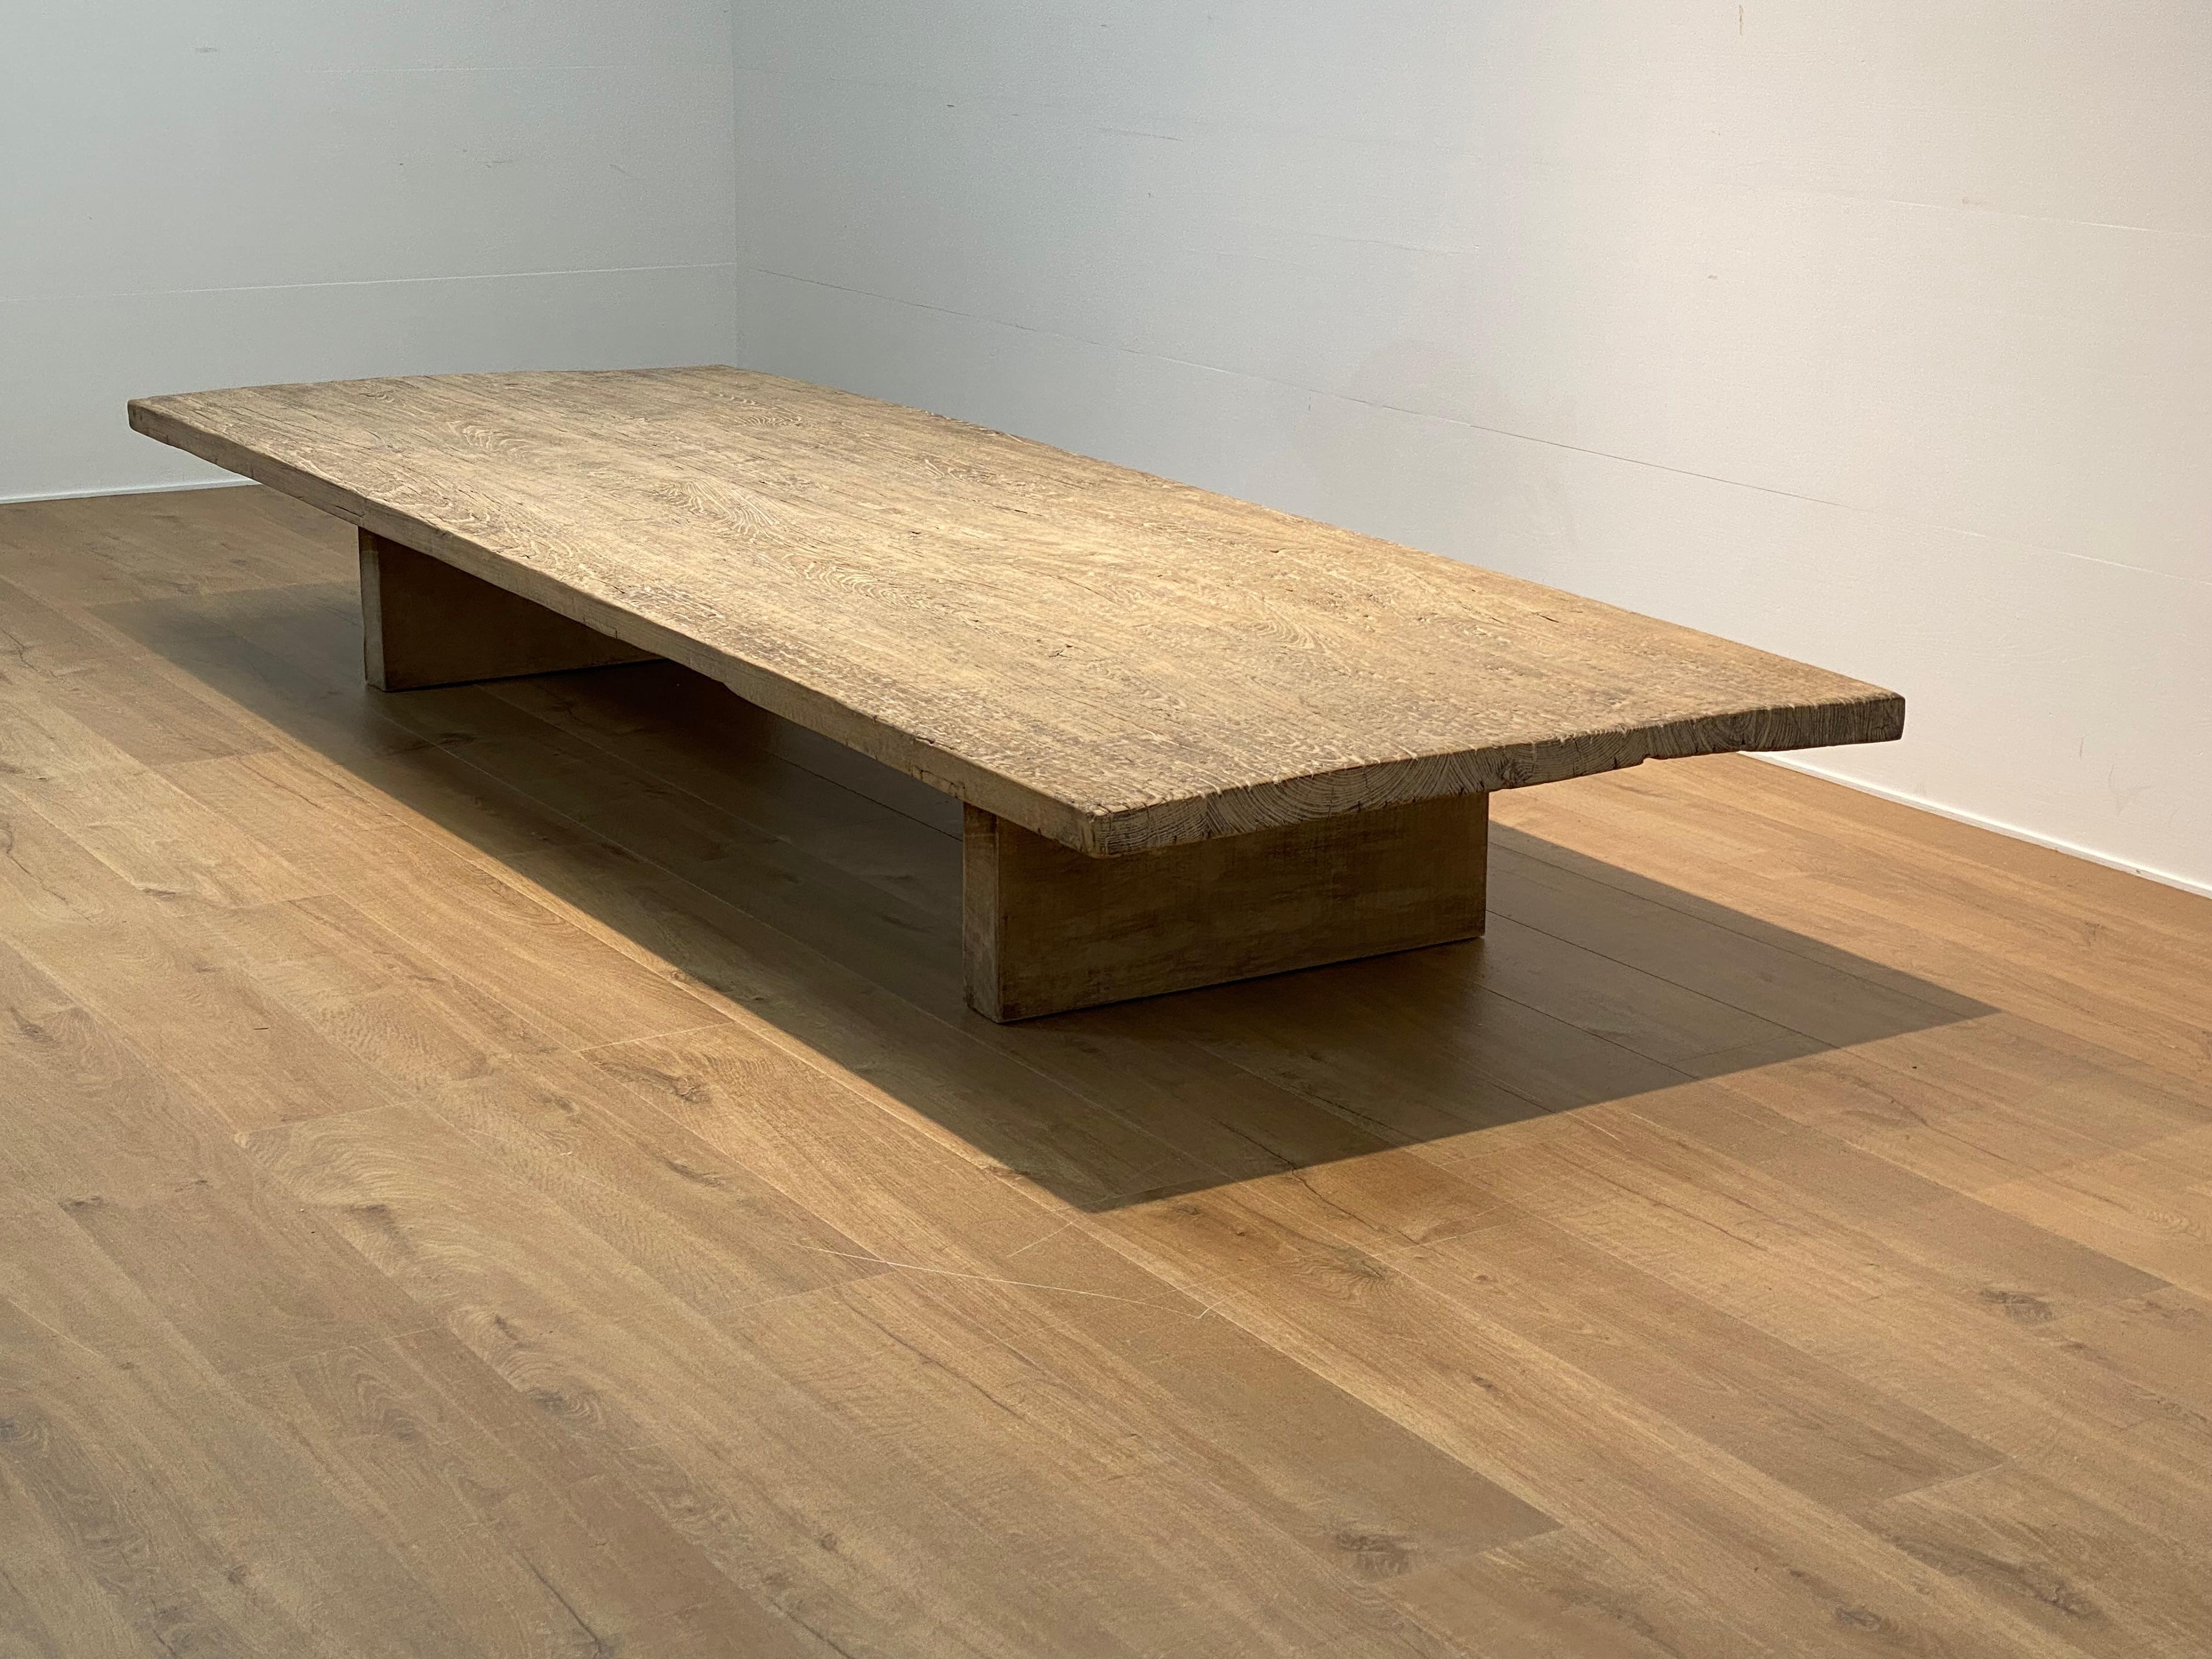 XXL Brutalist  Table in a bleached Elmwood,
the top of the table is placed on a contemporary wooden base,
great shine and patina of the bleached wood,
the table top shows signs of old restorations,
very powerful piece of furniture